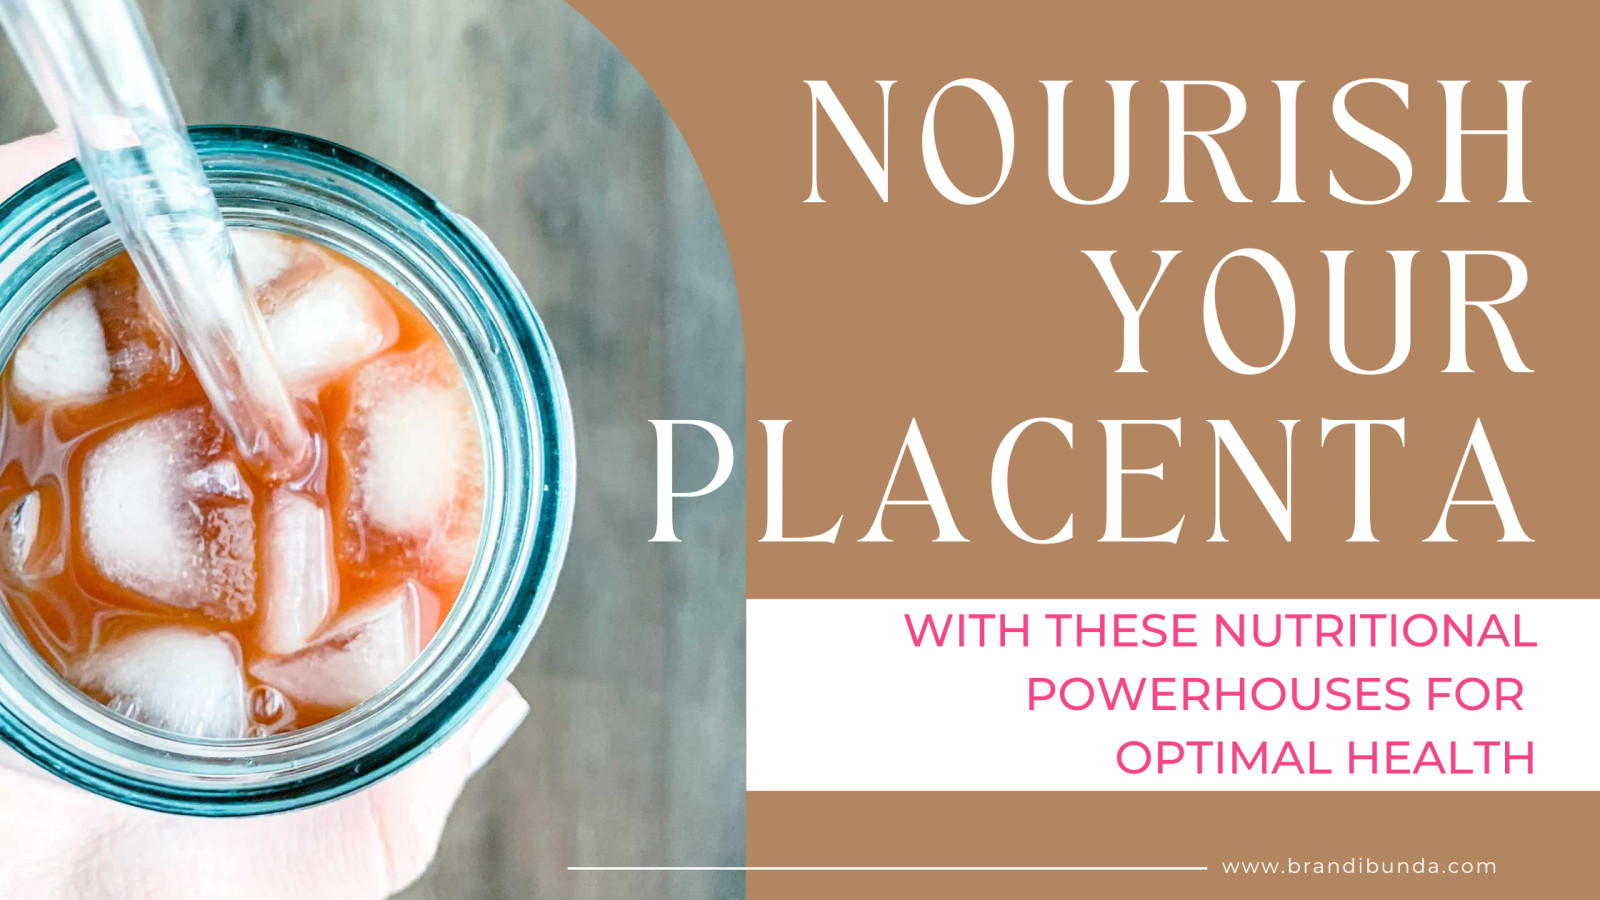 Nourish Your Placenta with These Nutritional Powerhouses for Optimal Health